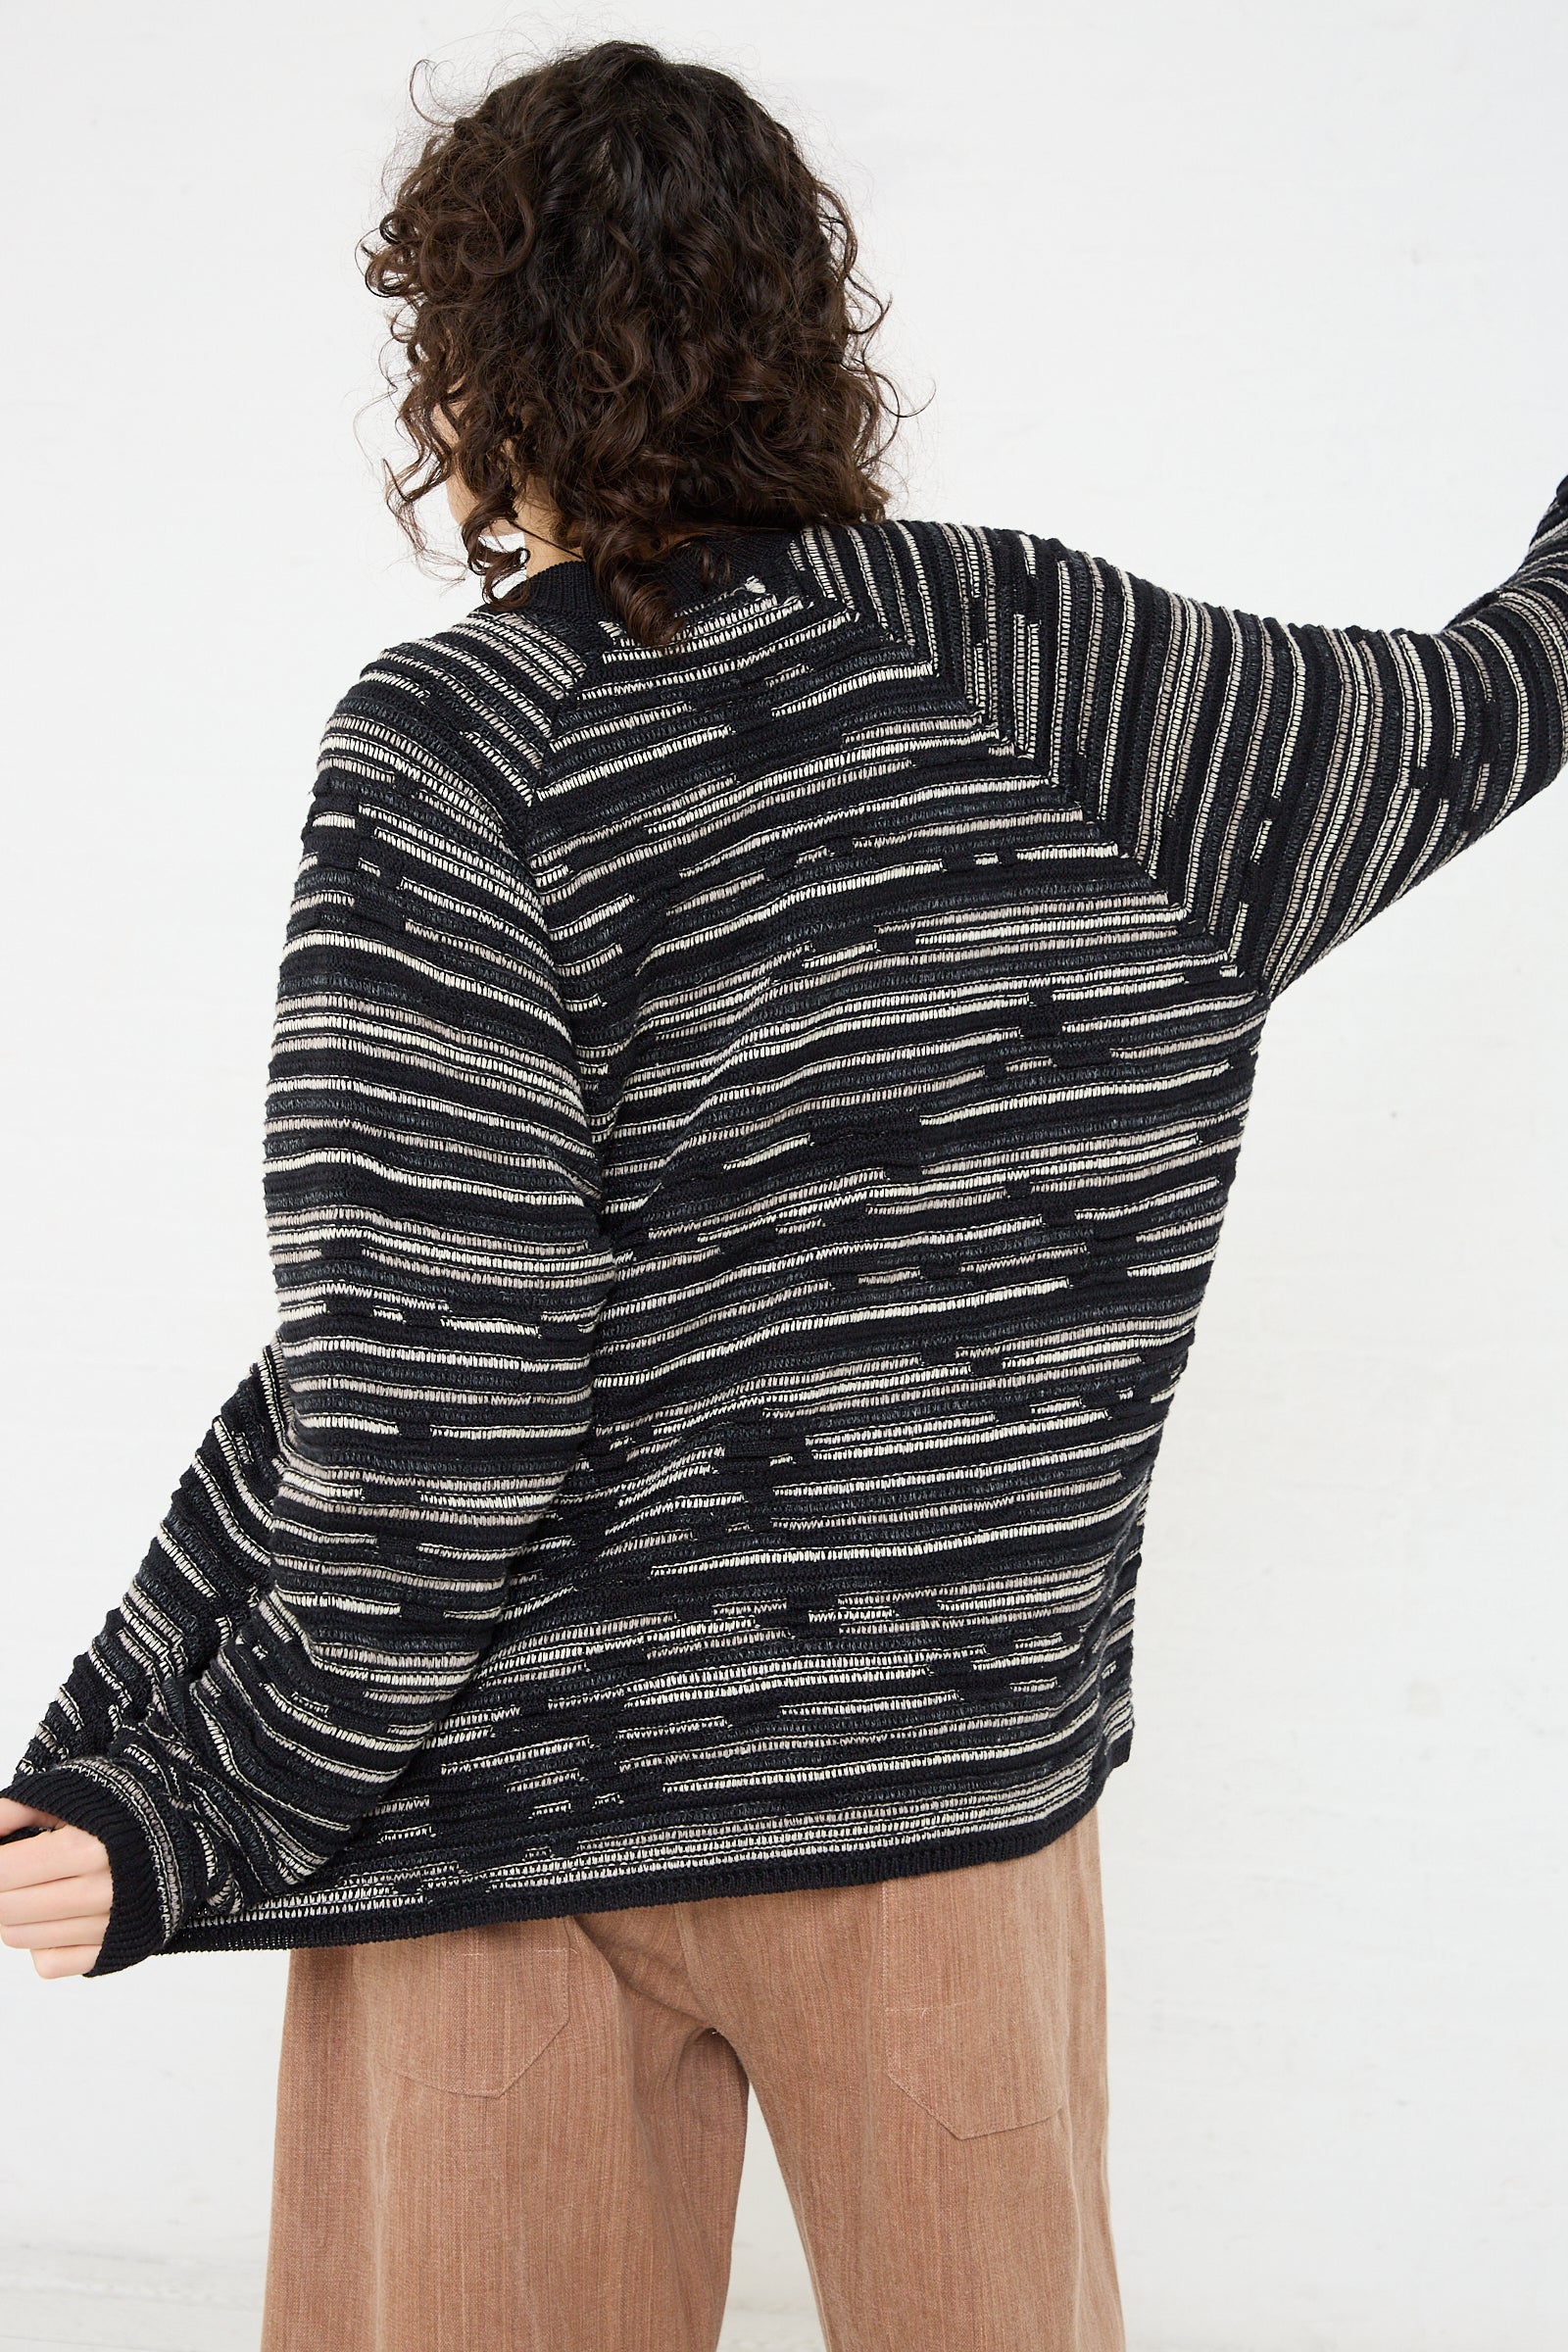 The back of a woman in a Linen Cotton Knit Crewneck sweater in Black by Jan-Jan Van Essche made of cotton.